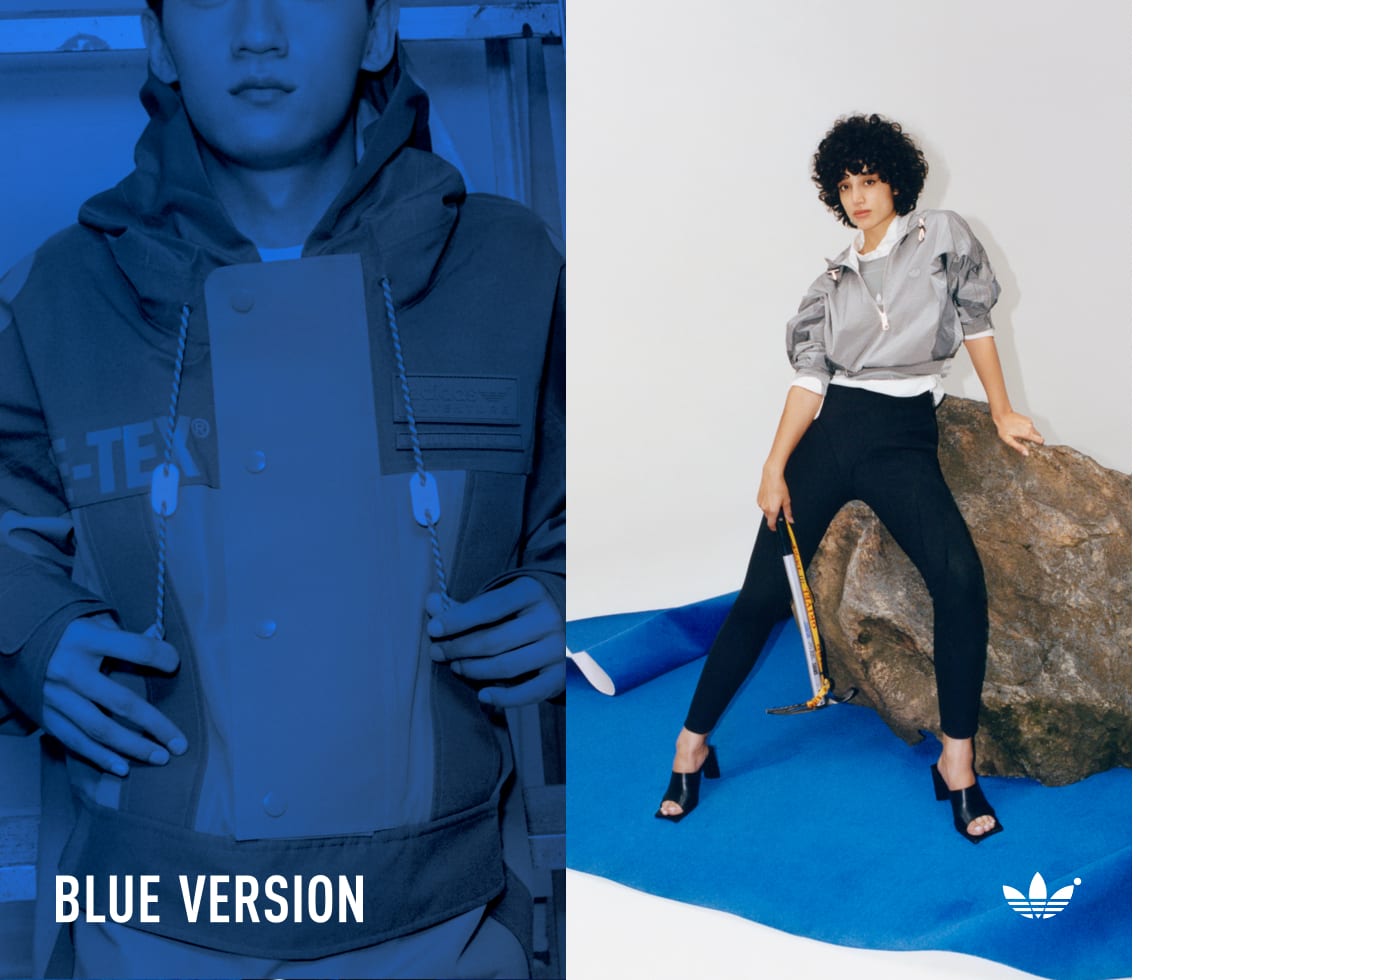 Two perpendicular images of two models sporting garments from the latest Blue Version collection.